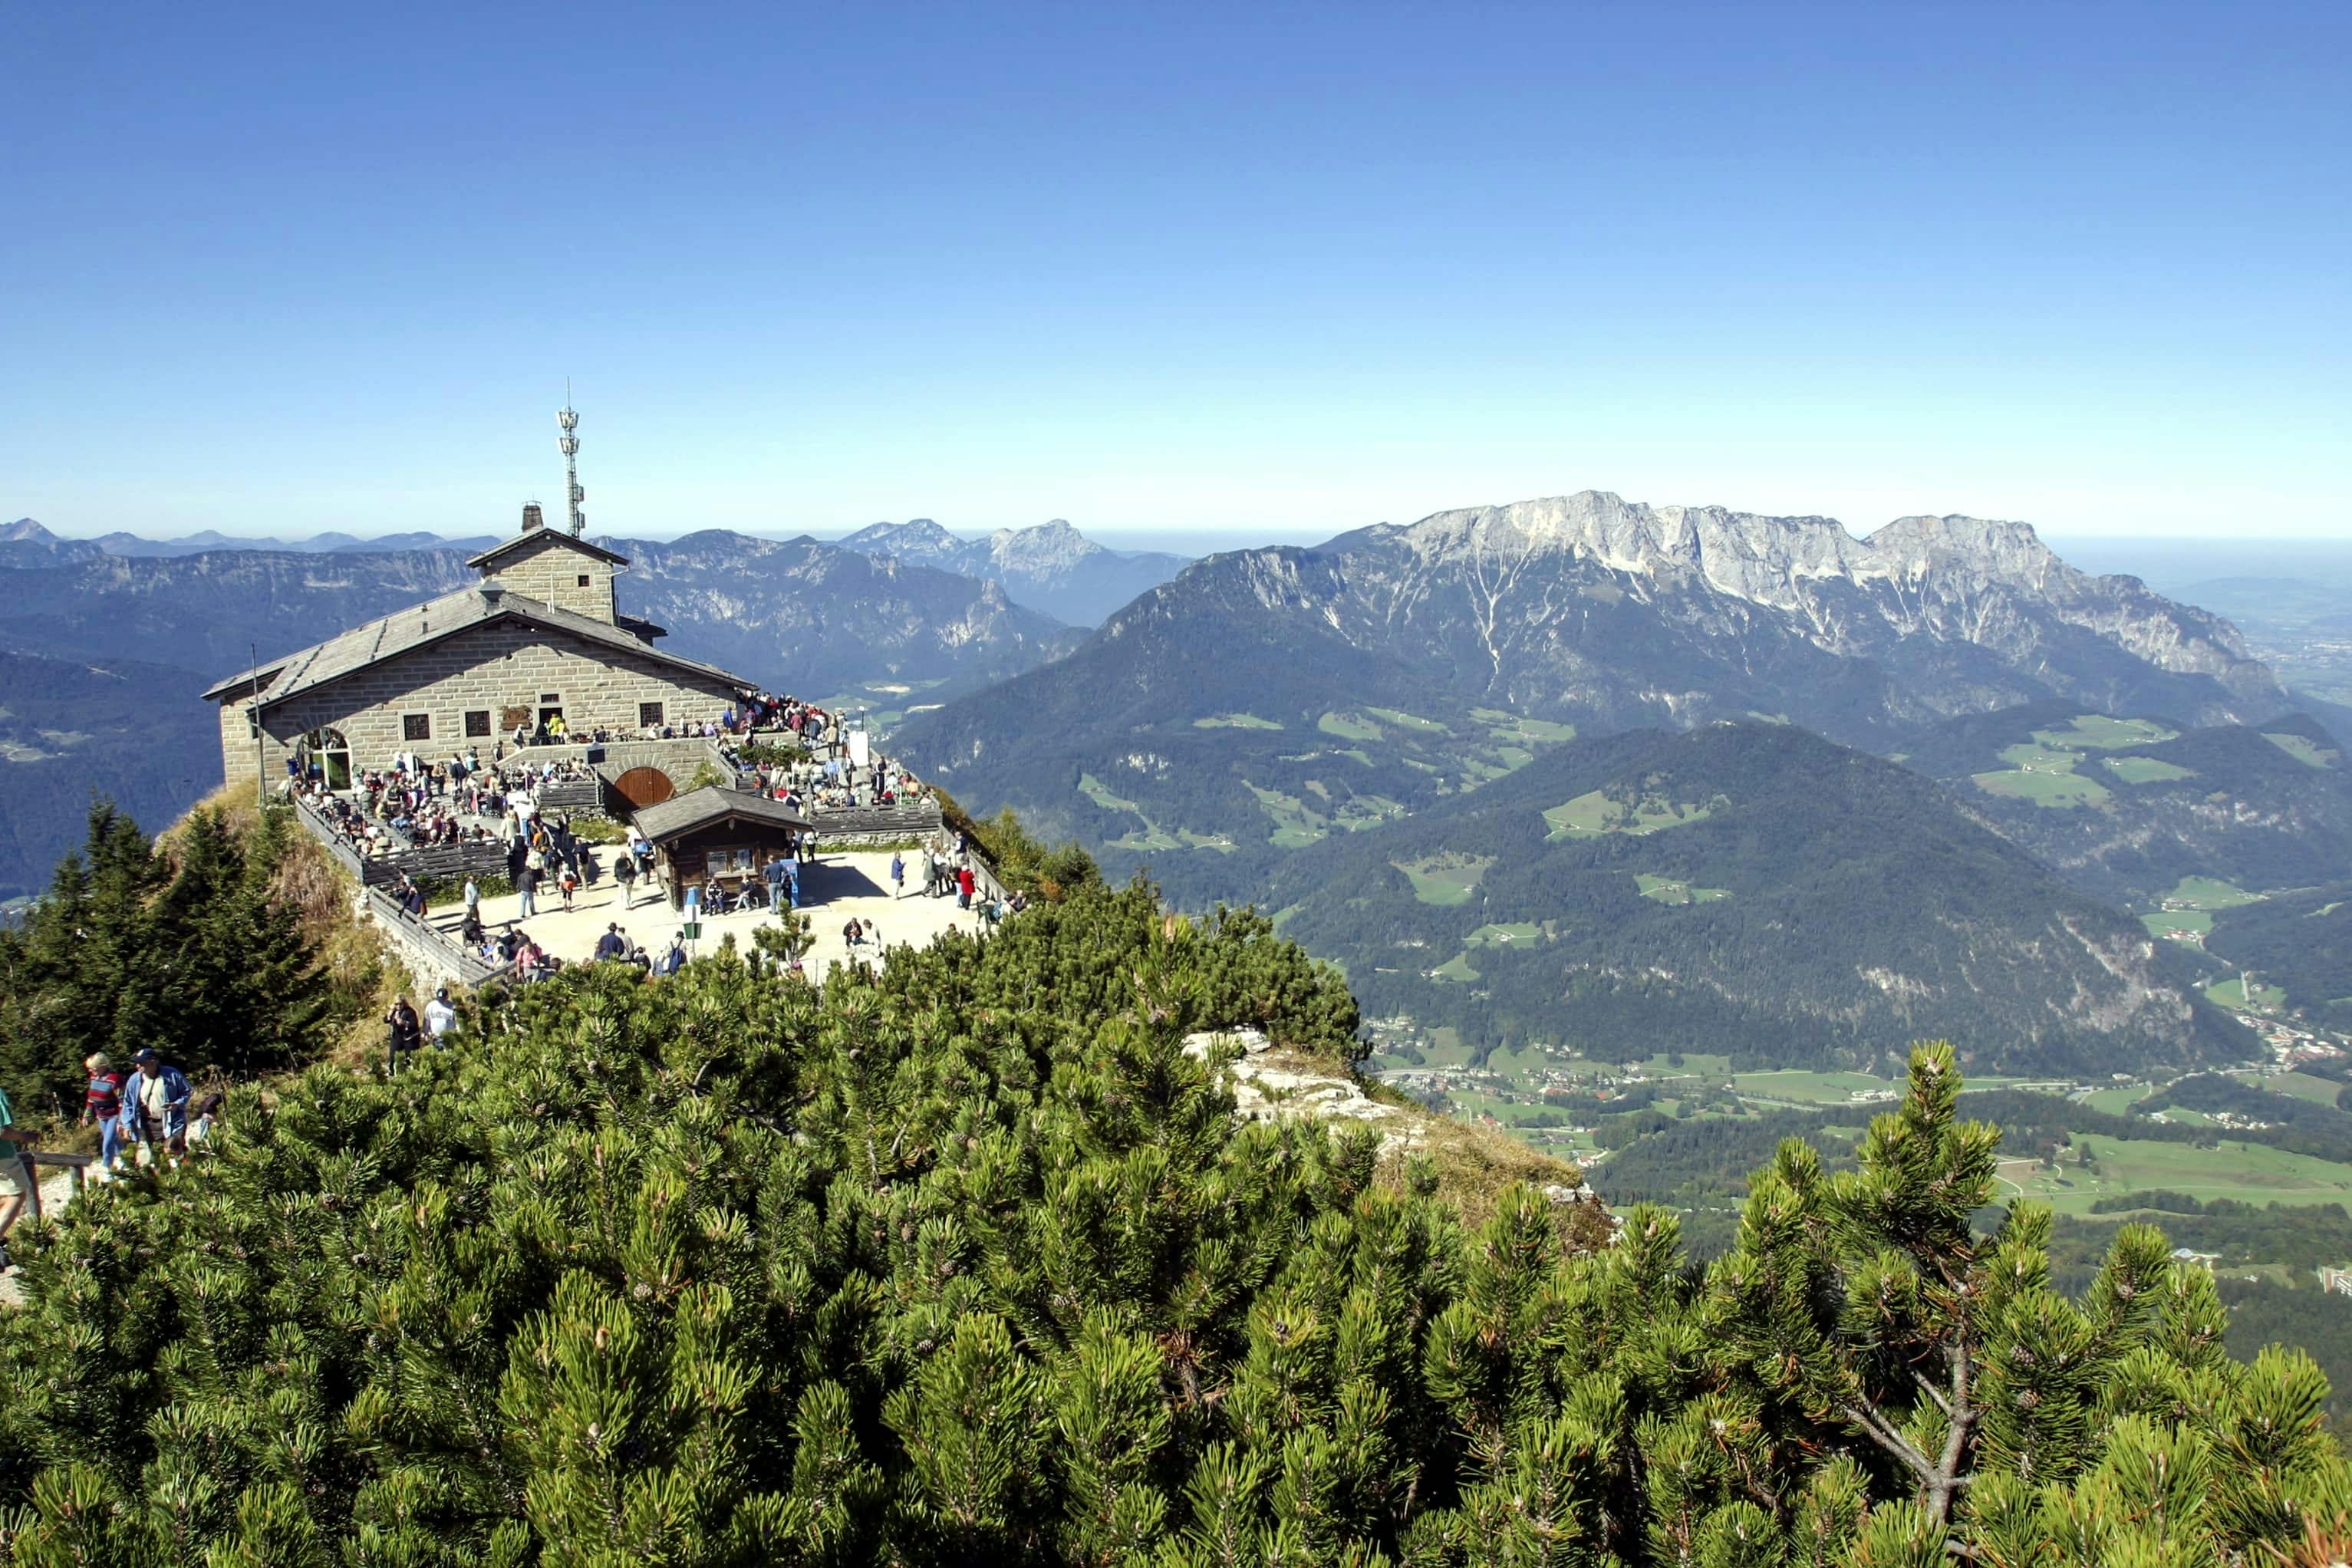 Day Trip to Berchtesgaden in the Bavarian Alps